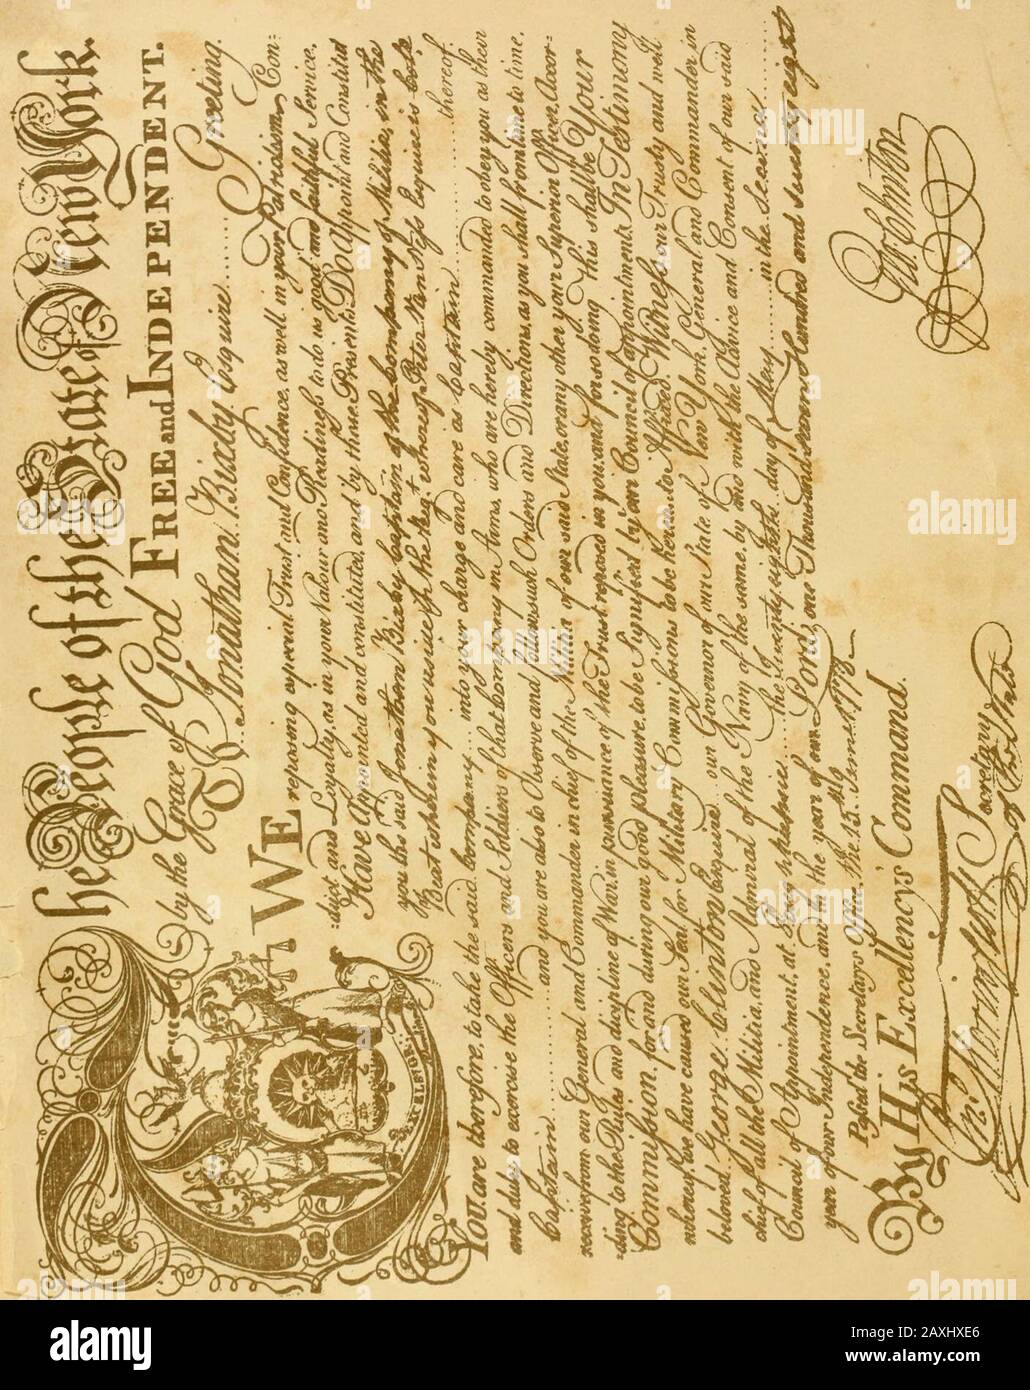 Documents relative to the colonial history of the state of New York . David or Dan 240 Youngs, Henry 232 Youngs, Joseph 547 Youngs, Joshua, lieut 288 Youngs, Samuel, lieut. Levies 259 Yule, James, lieut 538 638 Index. Z. Zannow, Fred 209 Zeager, Thomas 180 Zeaster, Mich 203 Zedwitz, Herrn, lieut.-col., 75; major 77, 537 Zedy, John, captain 543 Zeely, John, lieut 546 Zegart, Chr 204 Zener, Fred 198 Zeranius, Chr. 181 Ziele, Martin W., lieut Ziele, Peter W., It.-col. 15th Alhany Co. Refft!!!!! Ziely, Peter, colonel f Zimmerman, Coenr., ensign • • • ? • Zimmerman, Henry, lieut. 1st TryonCo. Eegt. Stock Photo